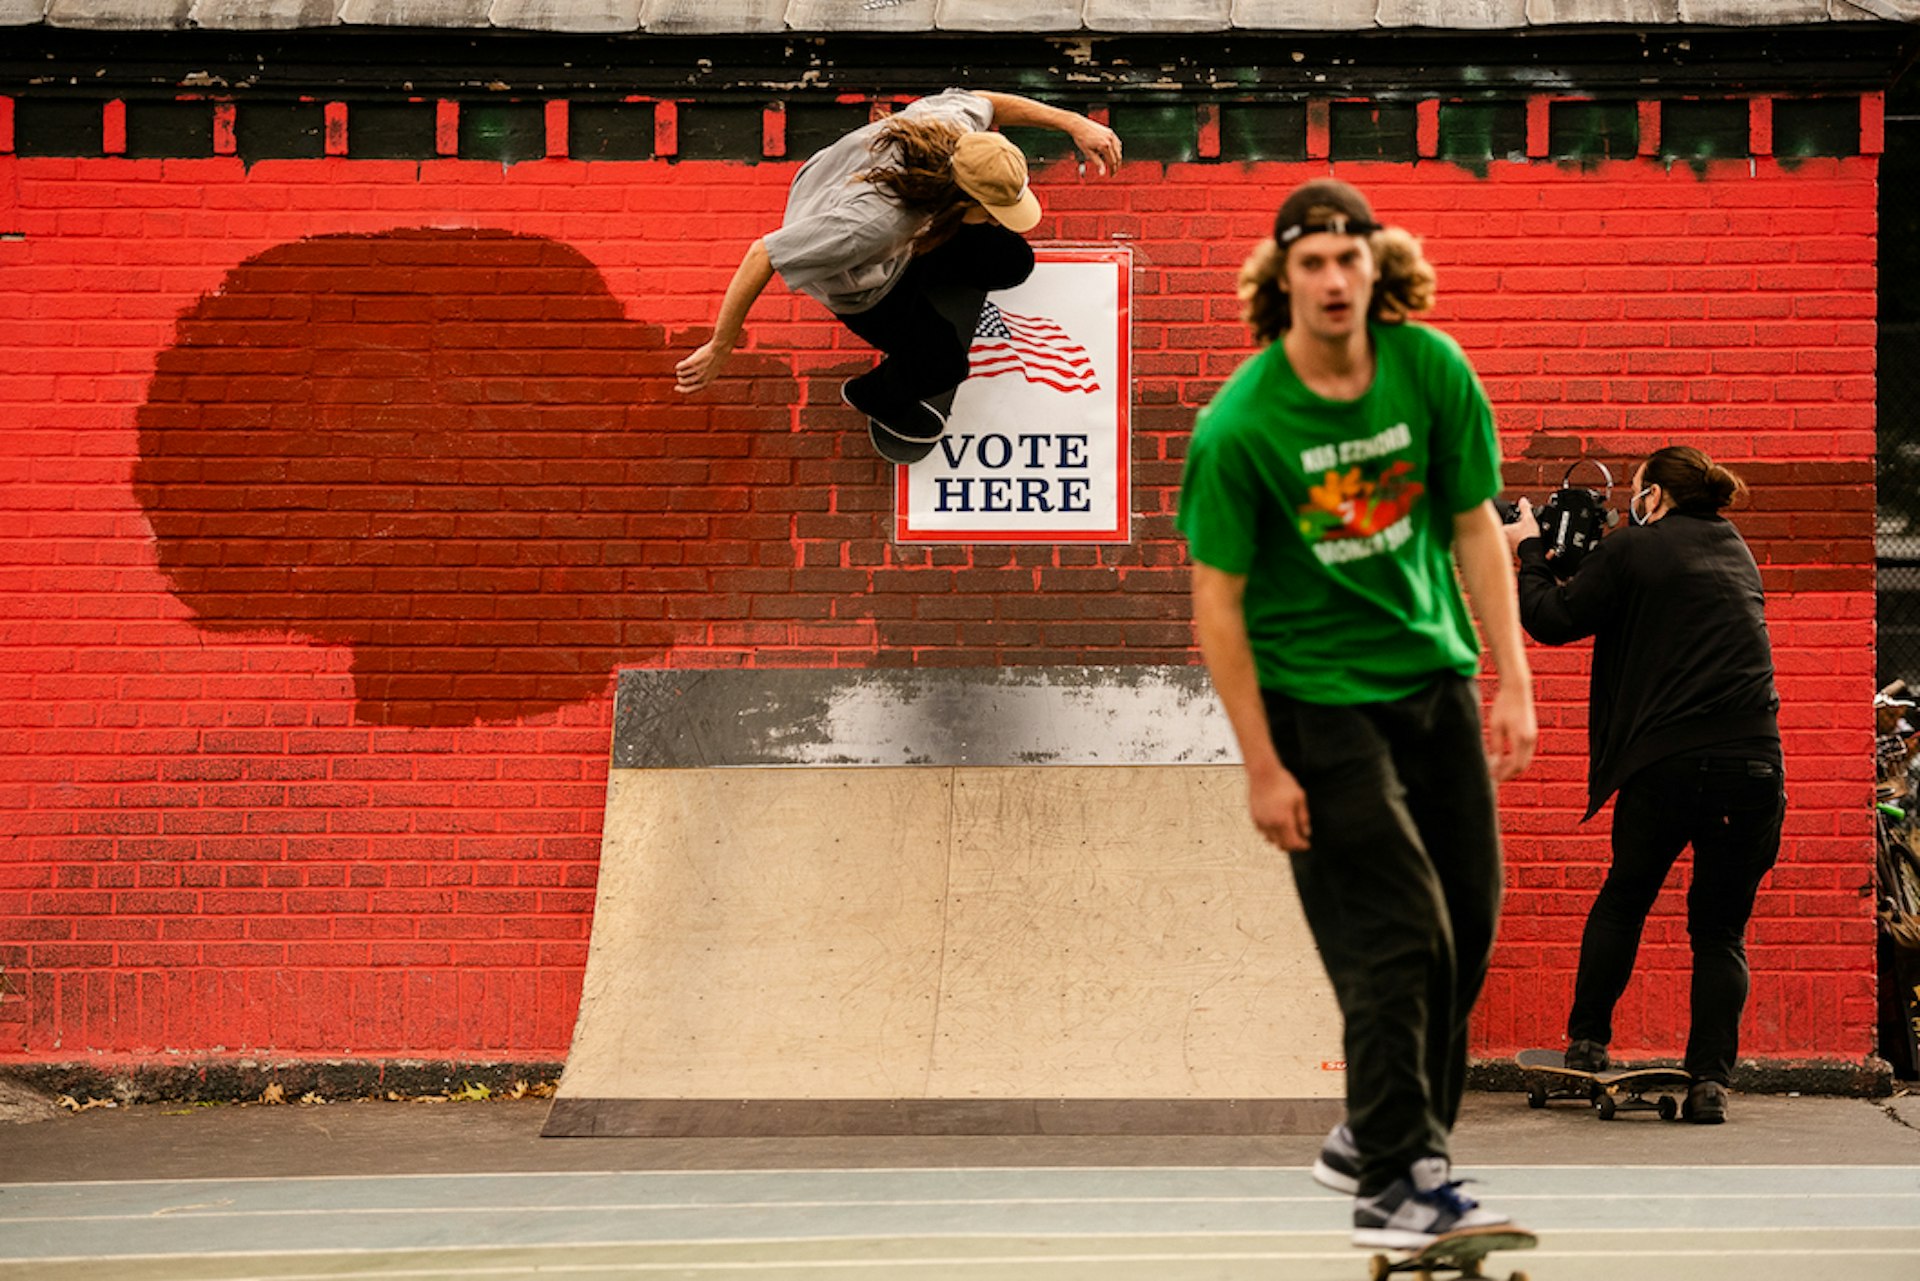 The activists getting skateboarders to vote